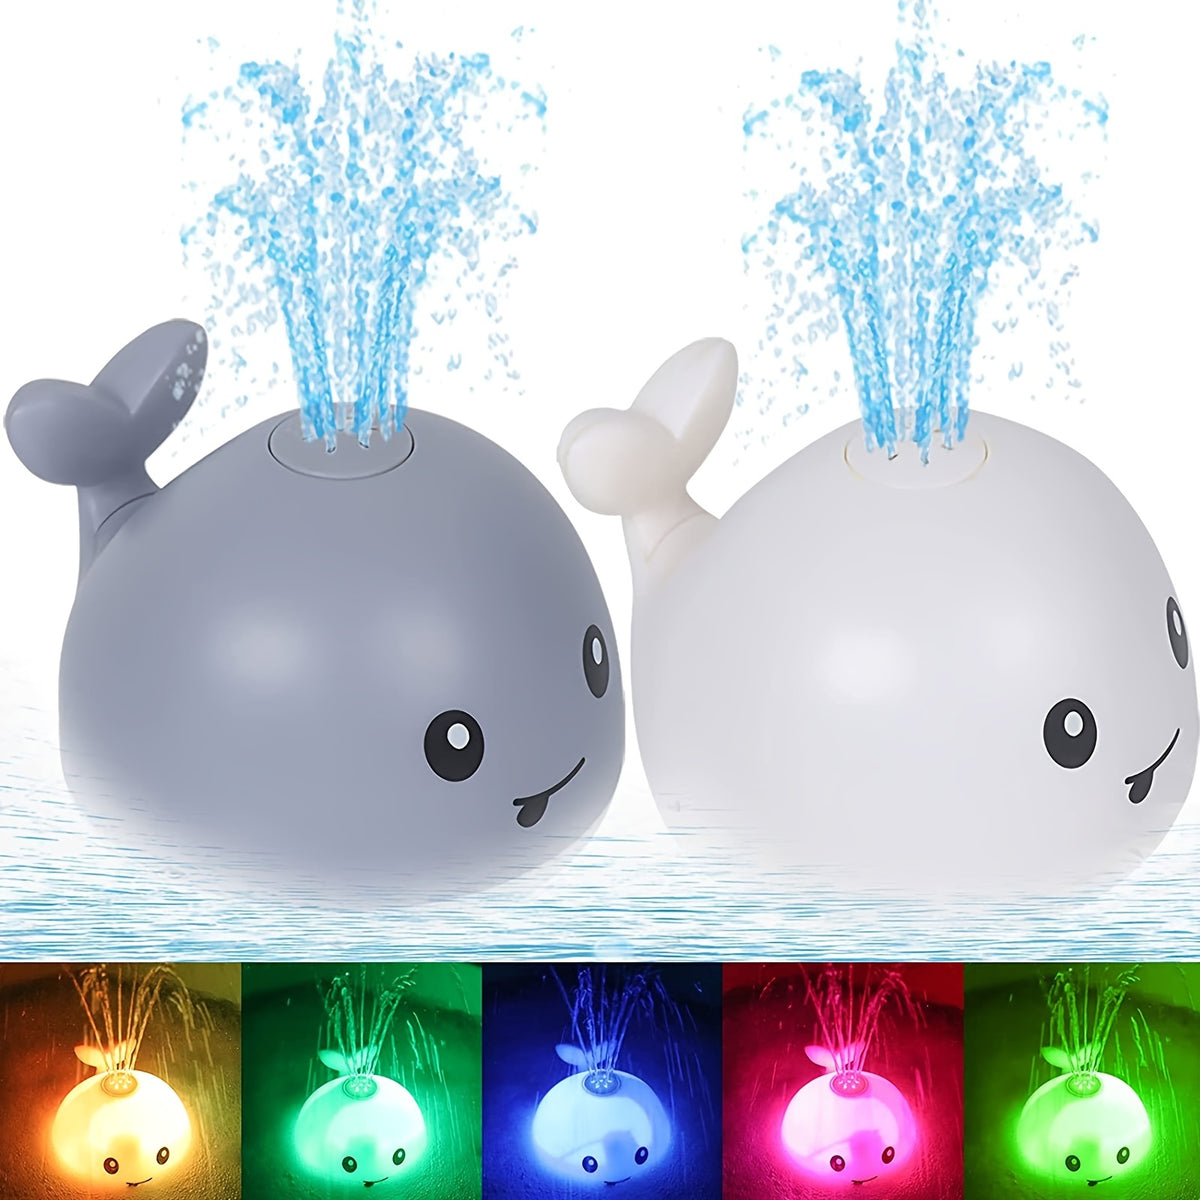 Whale Bath Toy, Light Up Baby Bathtub Toys With Automatic Spray Water And Colorful LED Light,Induction Sprinkler Bathroom Cykapu